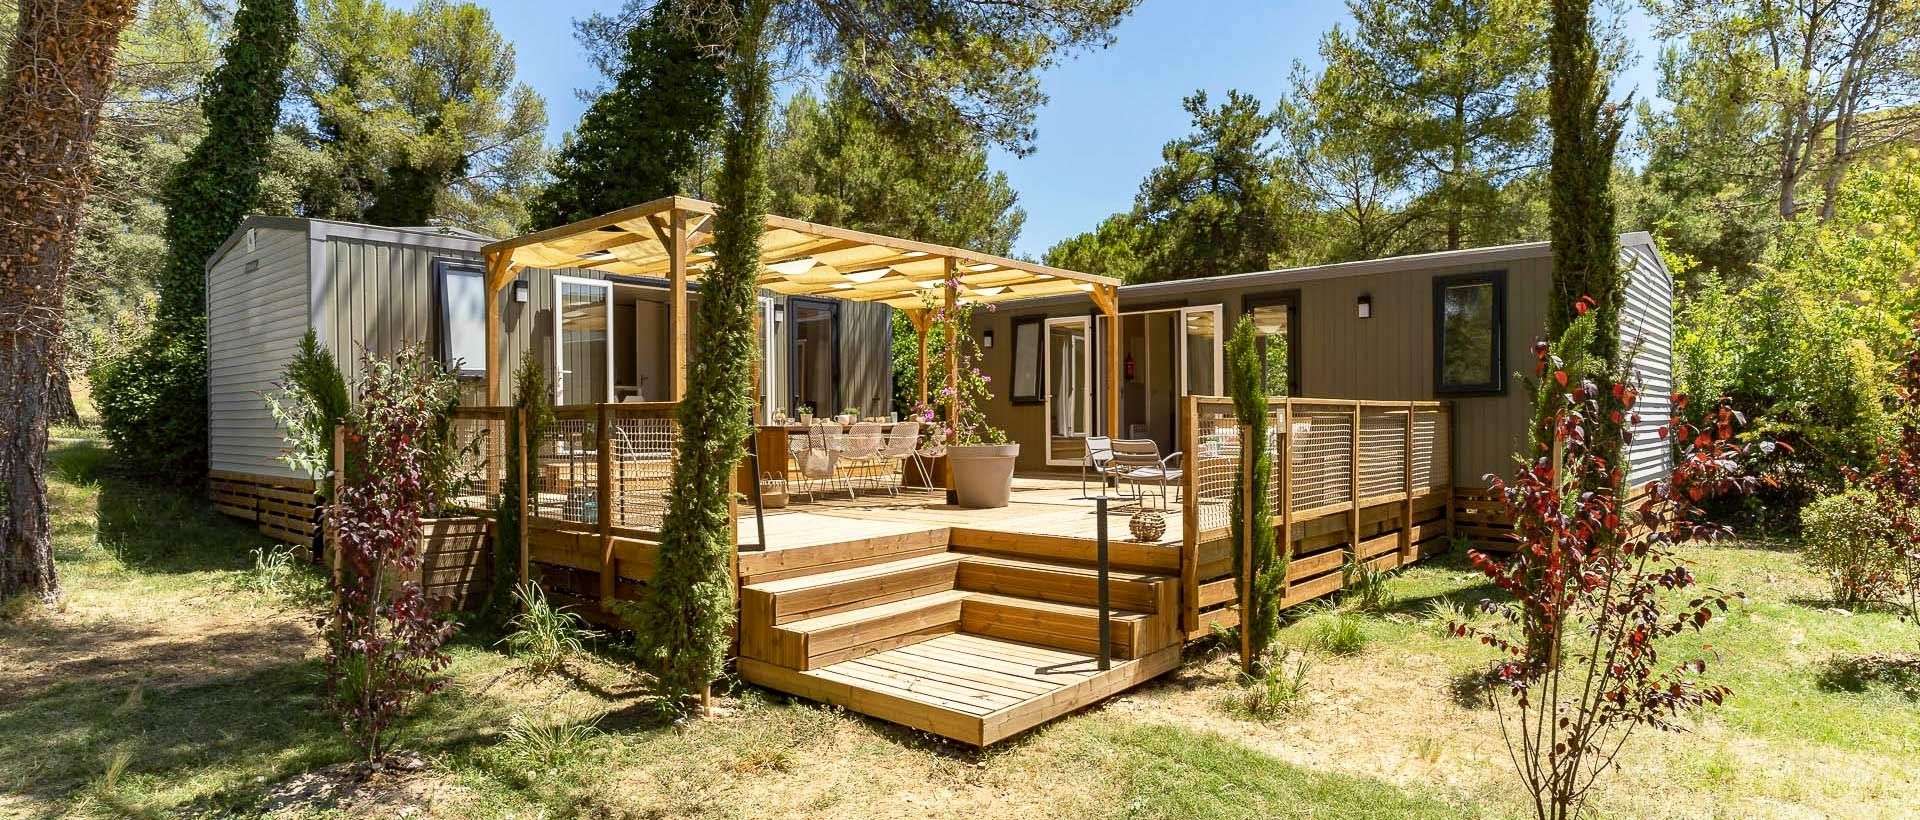 Friends mobile home for 10 people